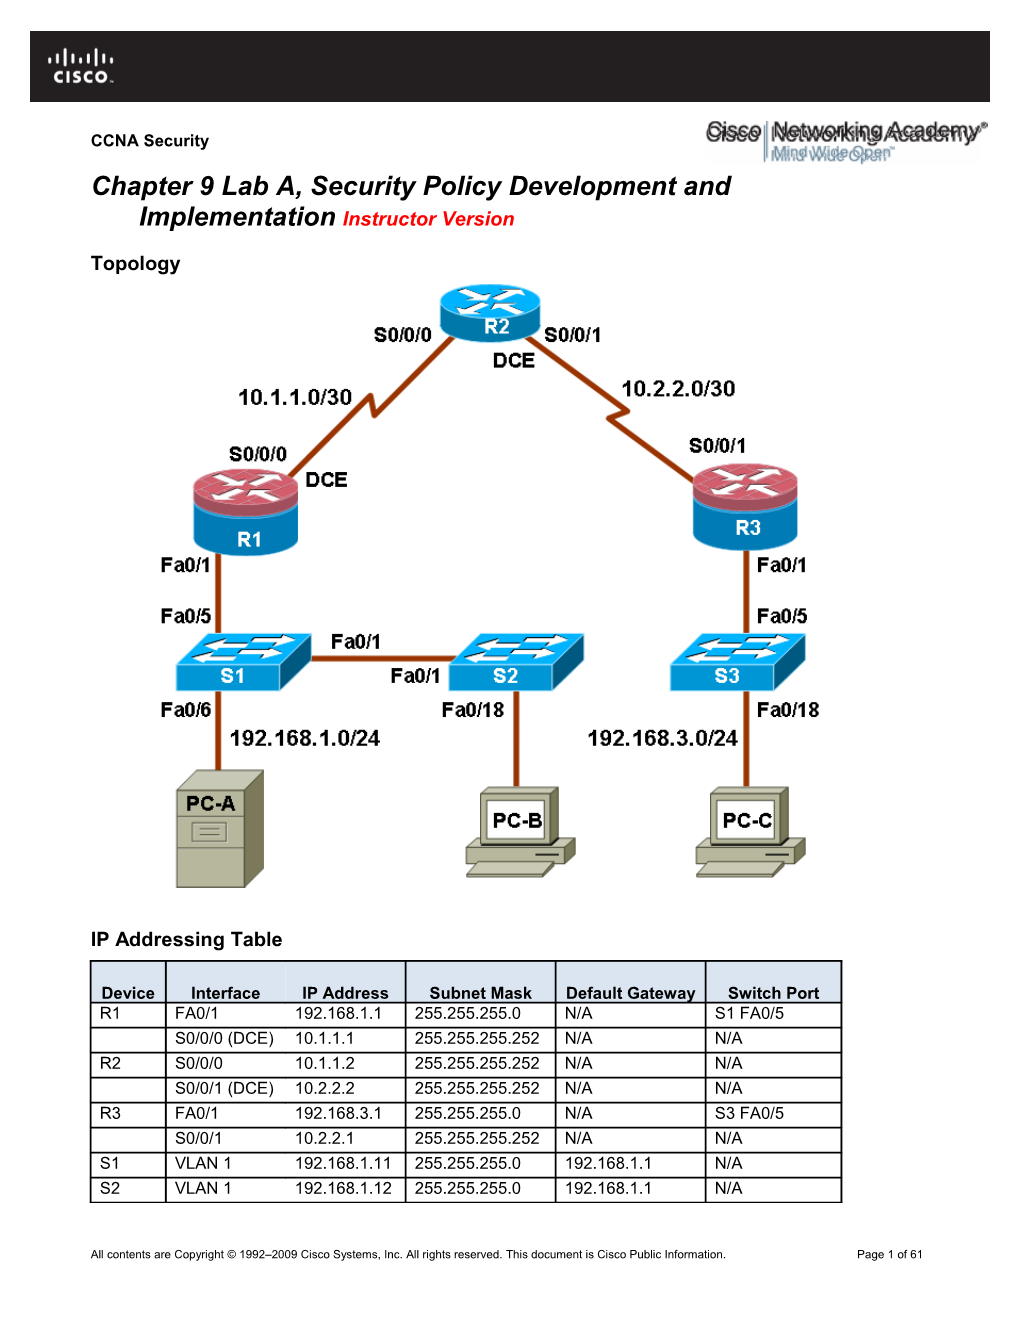 Chapter 3 Lab a - Securing Administrative Access Using AAA and RADIUS